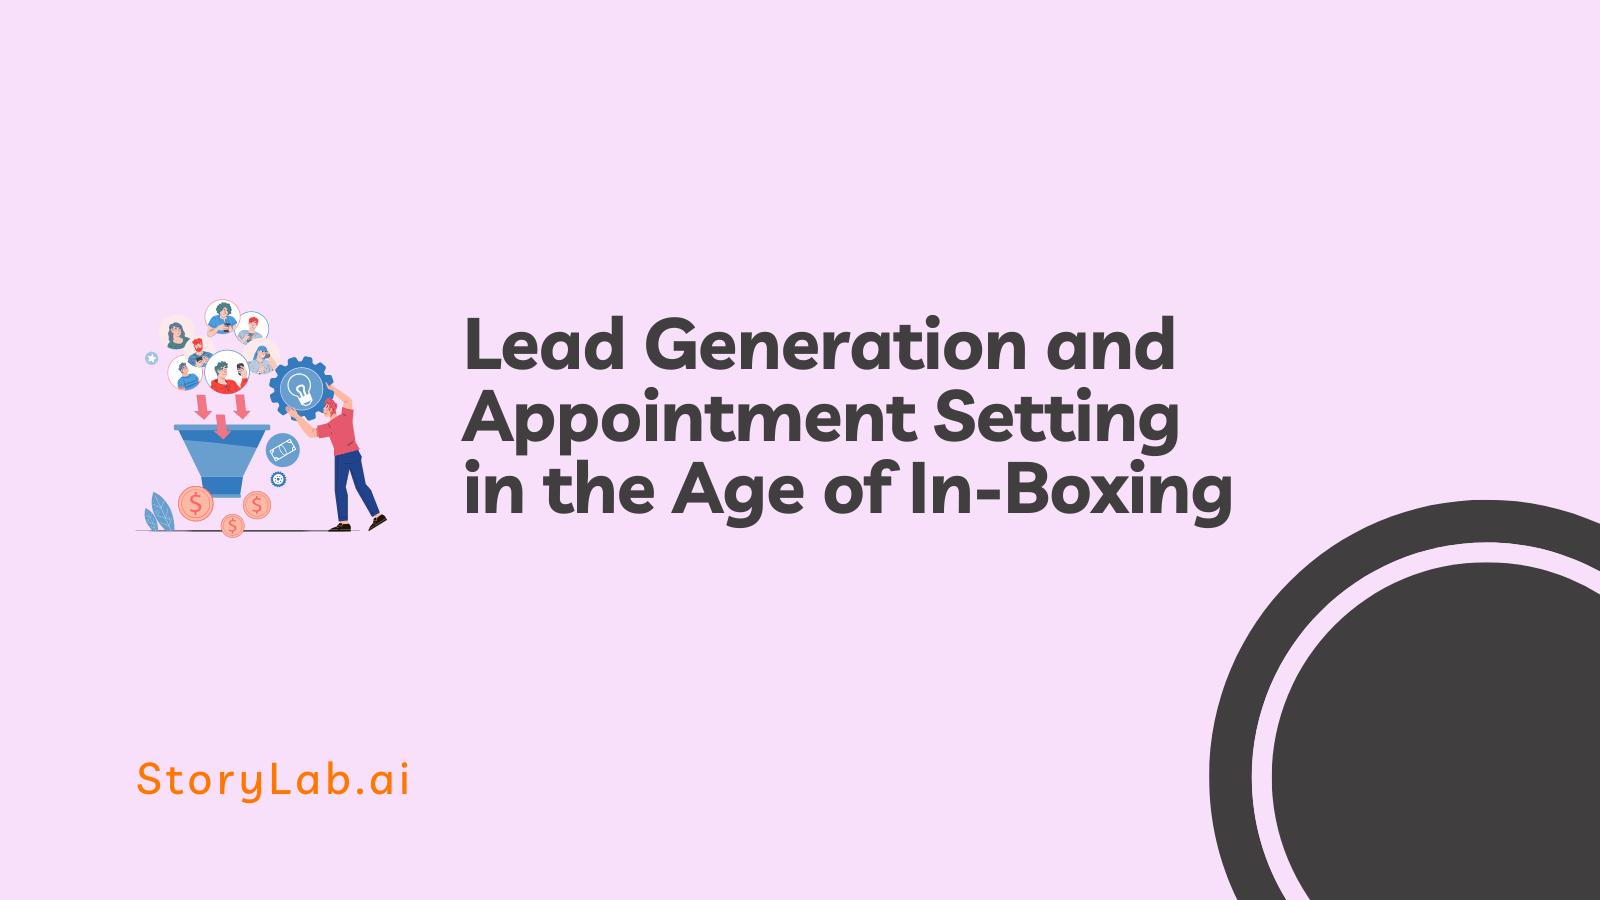 Lead Generation and Appointment Setting in the Age of In-Boxing